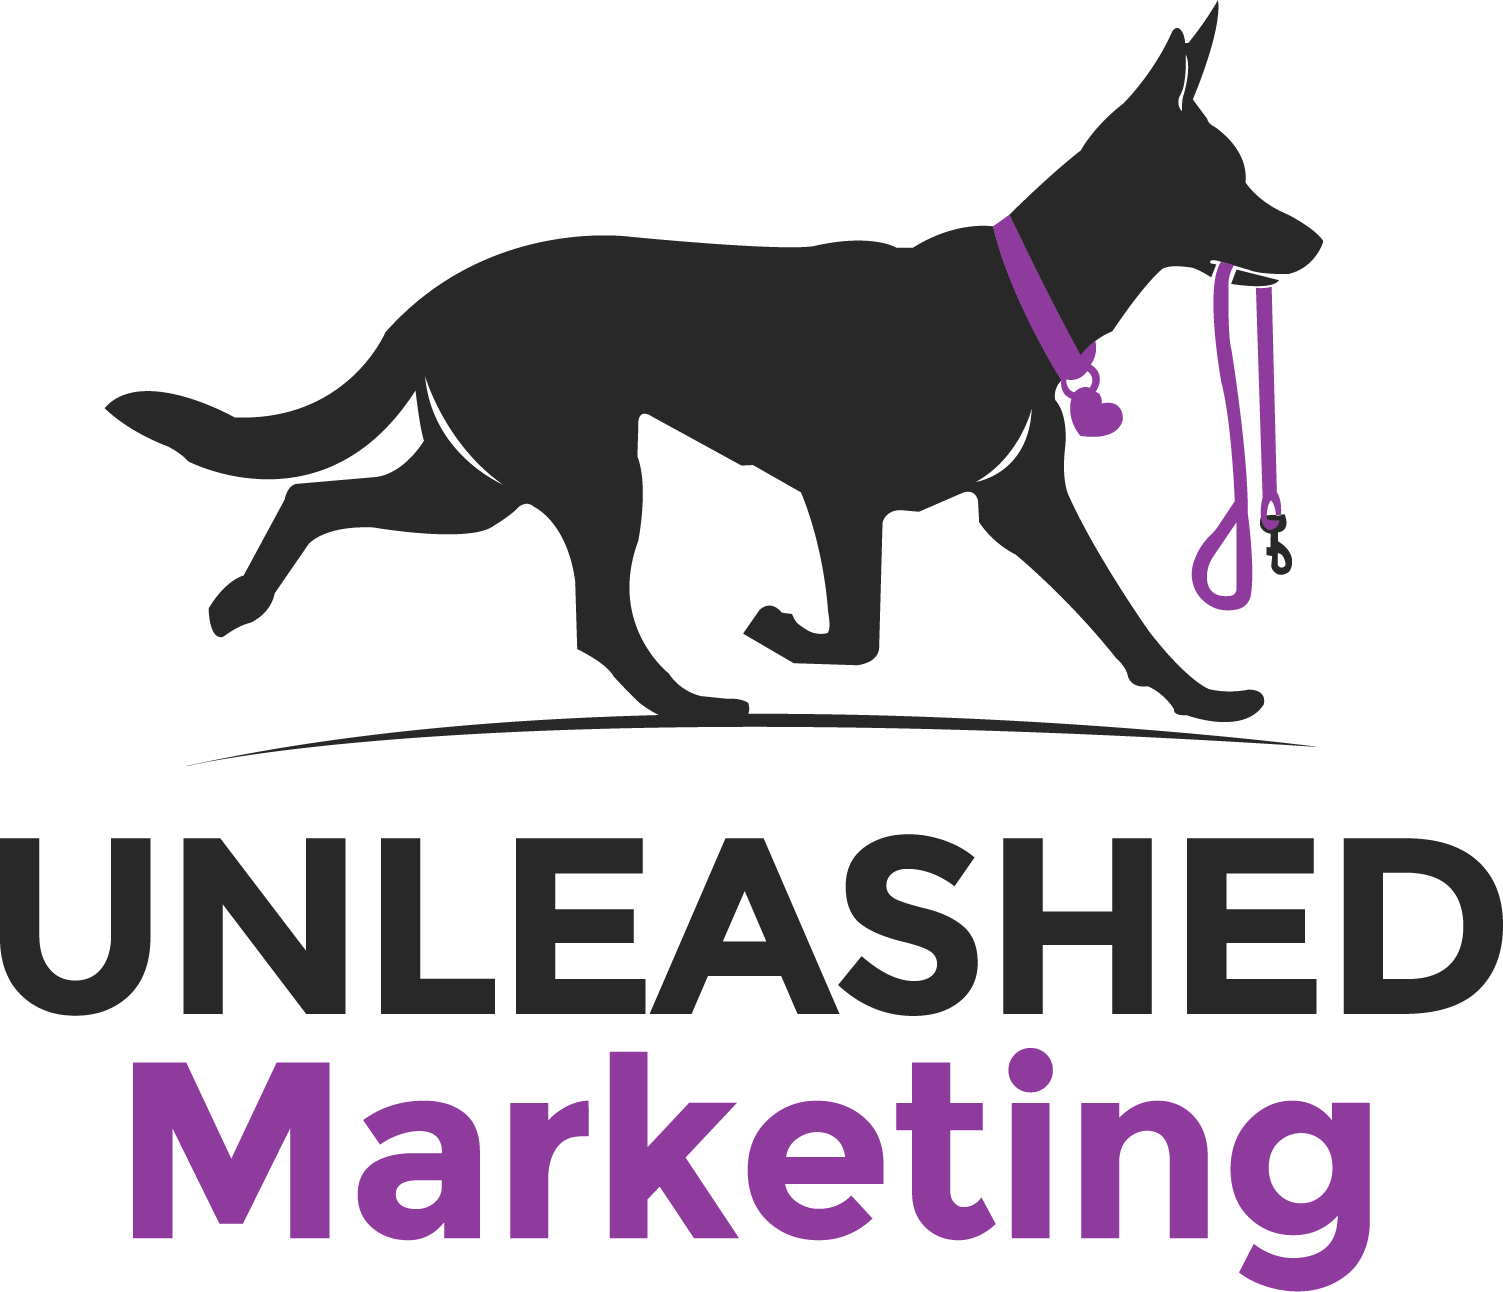 Unleashed Marketing, Wednesday, December 30, 2020, Press release picture